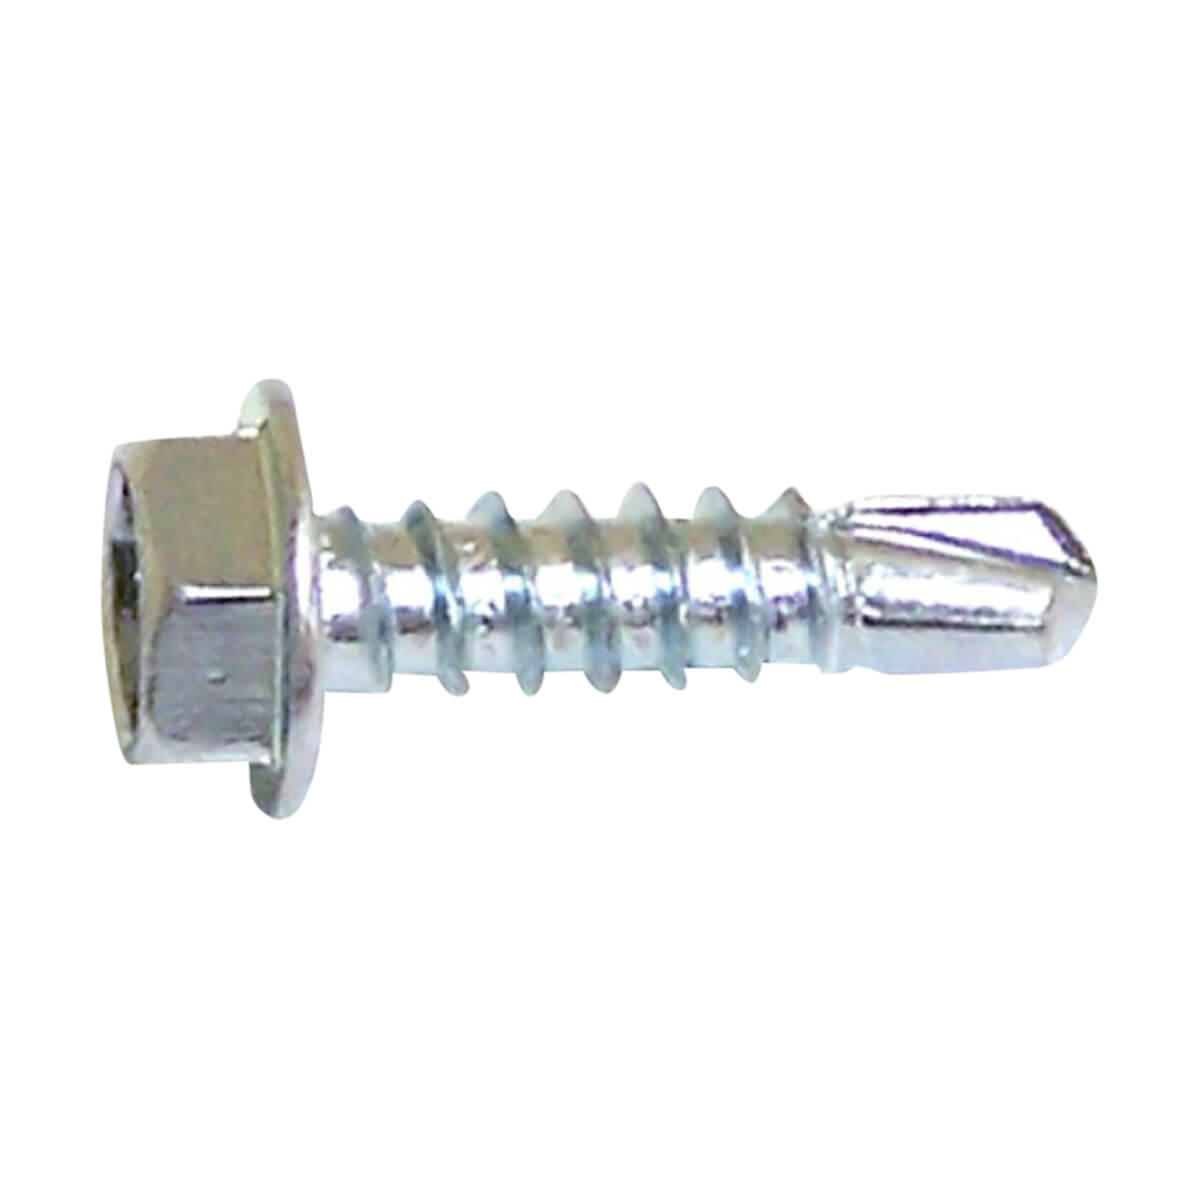 Hex with Washer Self-Drilling Screws - #12 X 1-1/2-in - 100 / Box